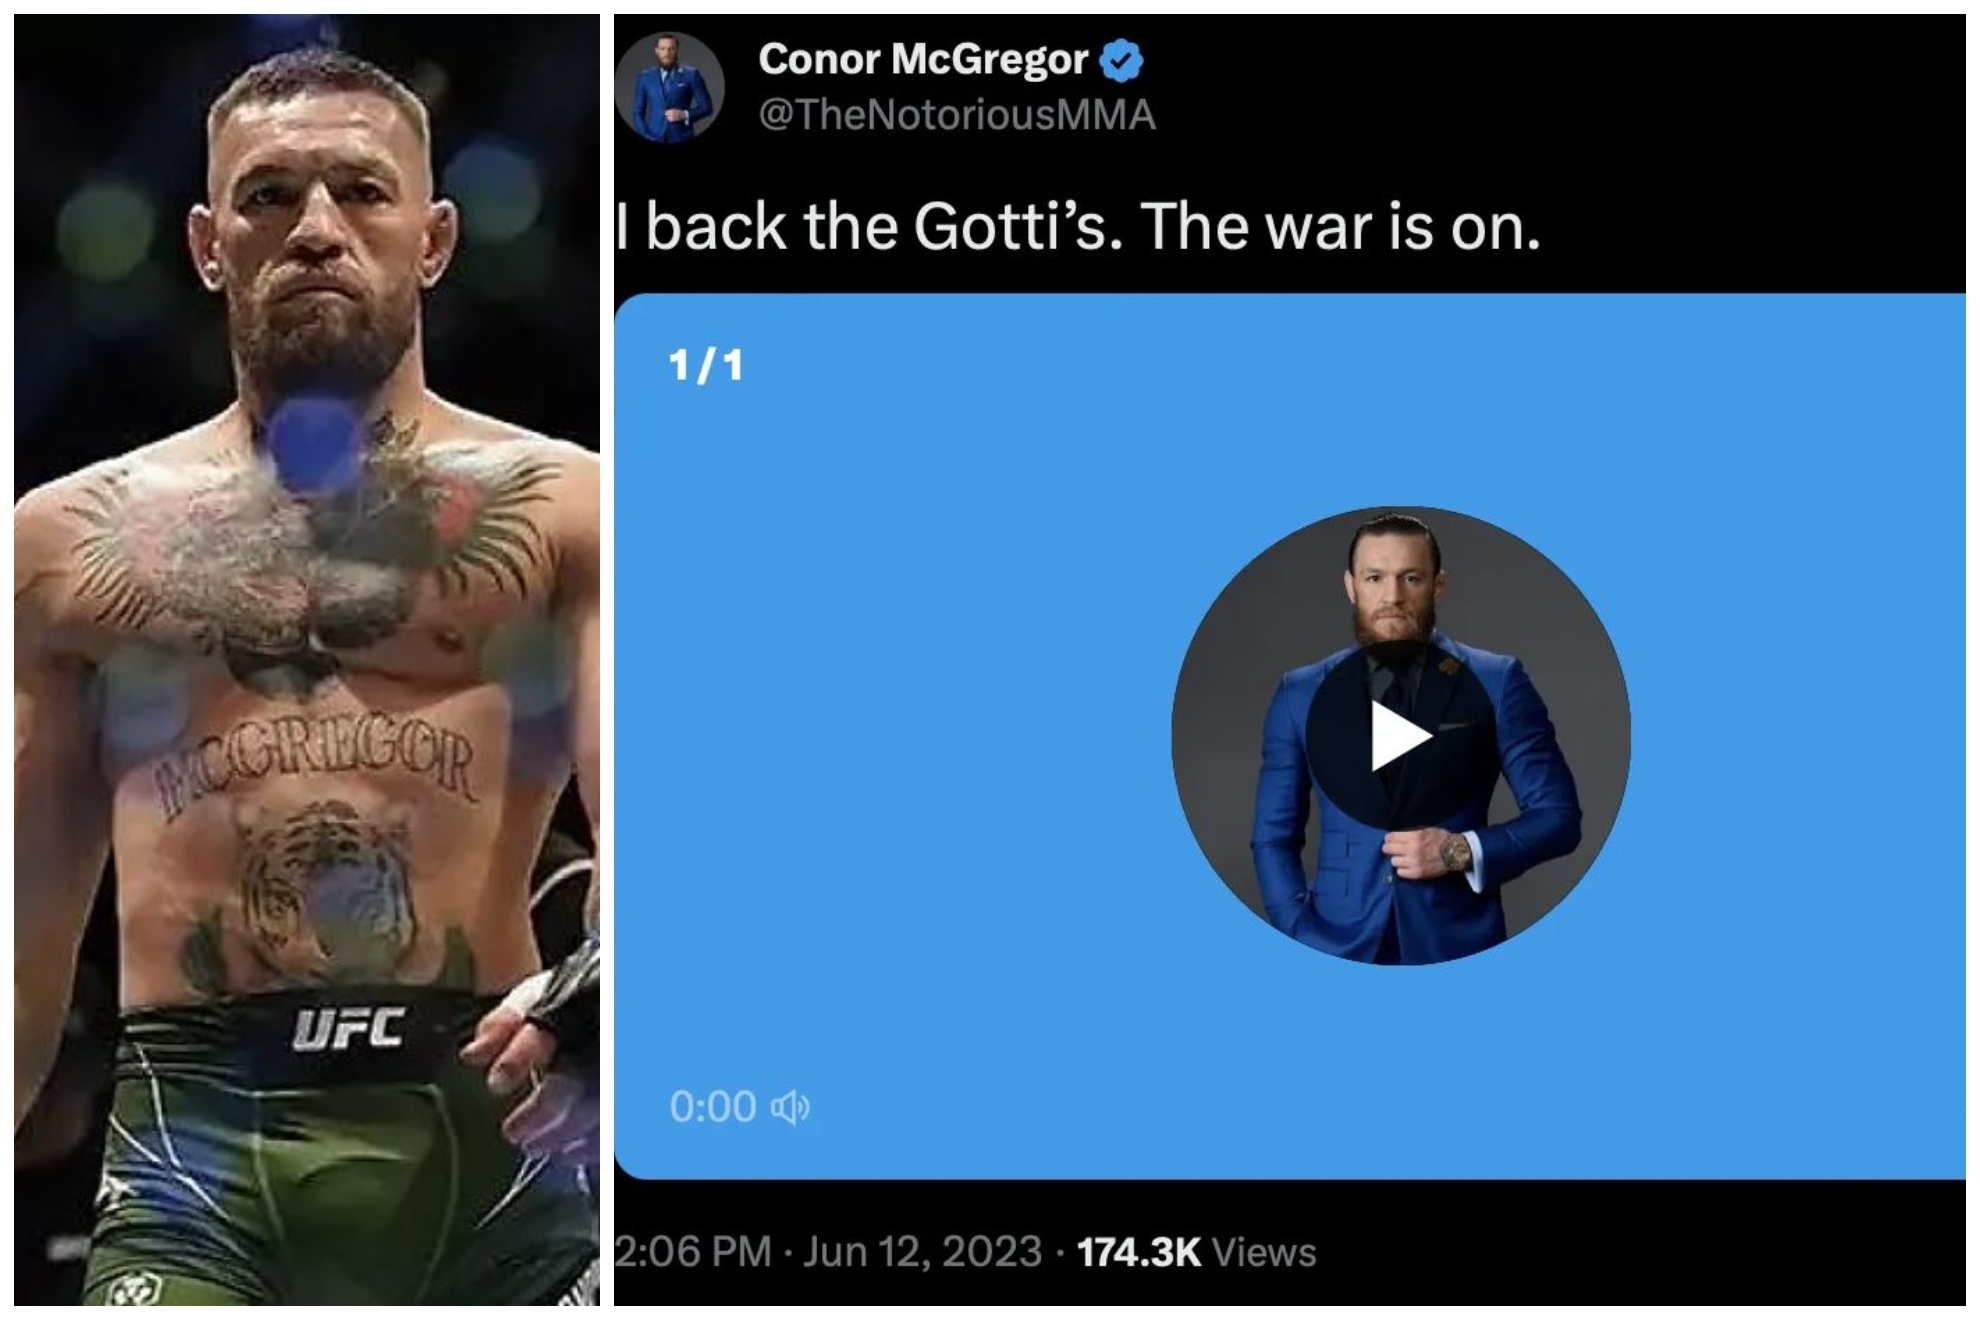 Conor McGregor's message after Mayweather vs Gotti brawl: The war is on